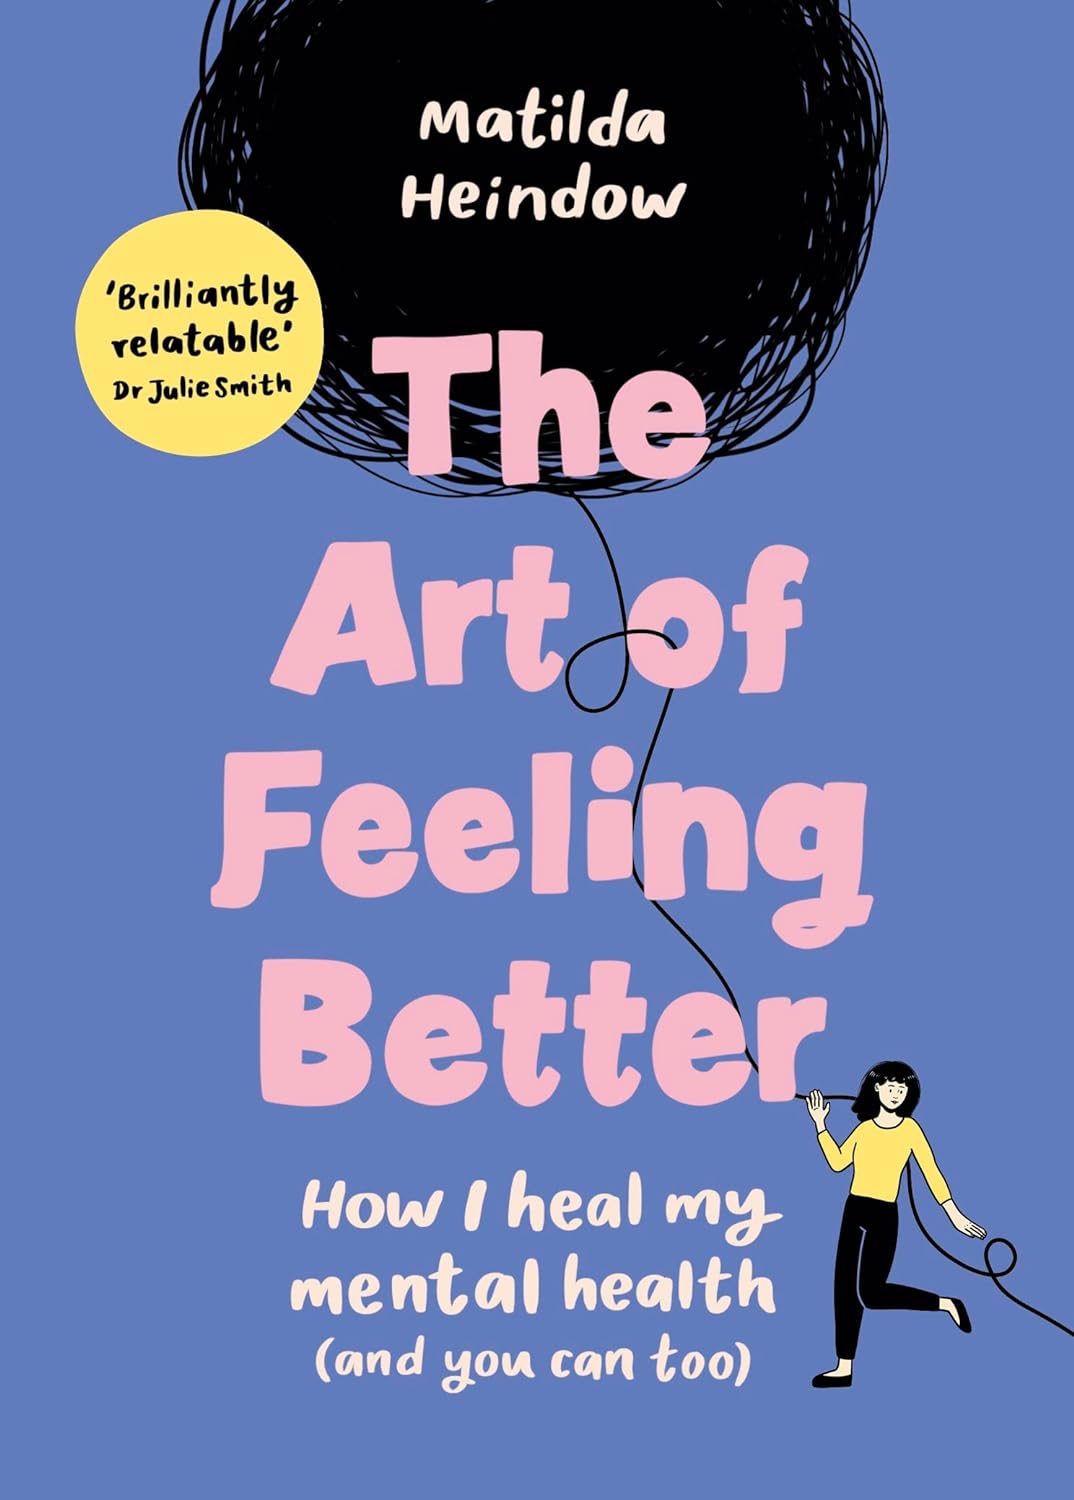 Cover of "The Art of Feeling Better" by Matilda Heindow